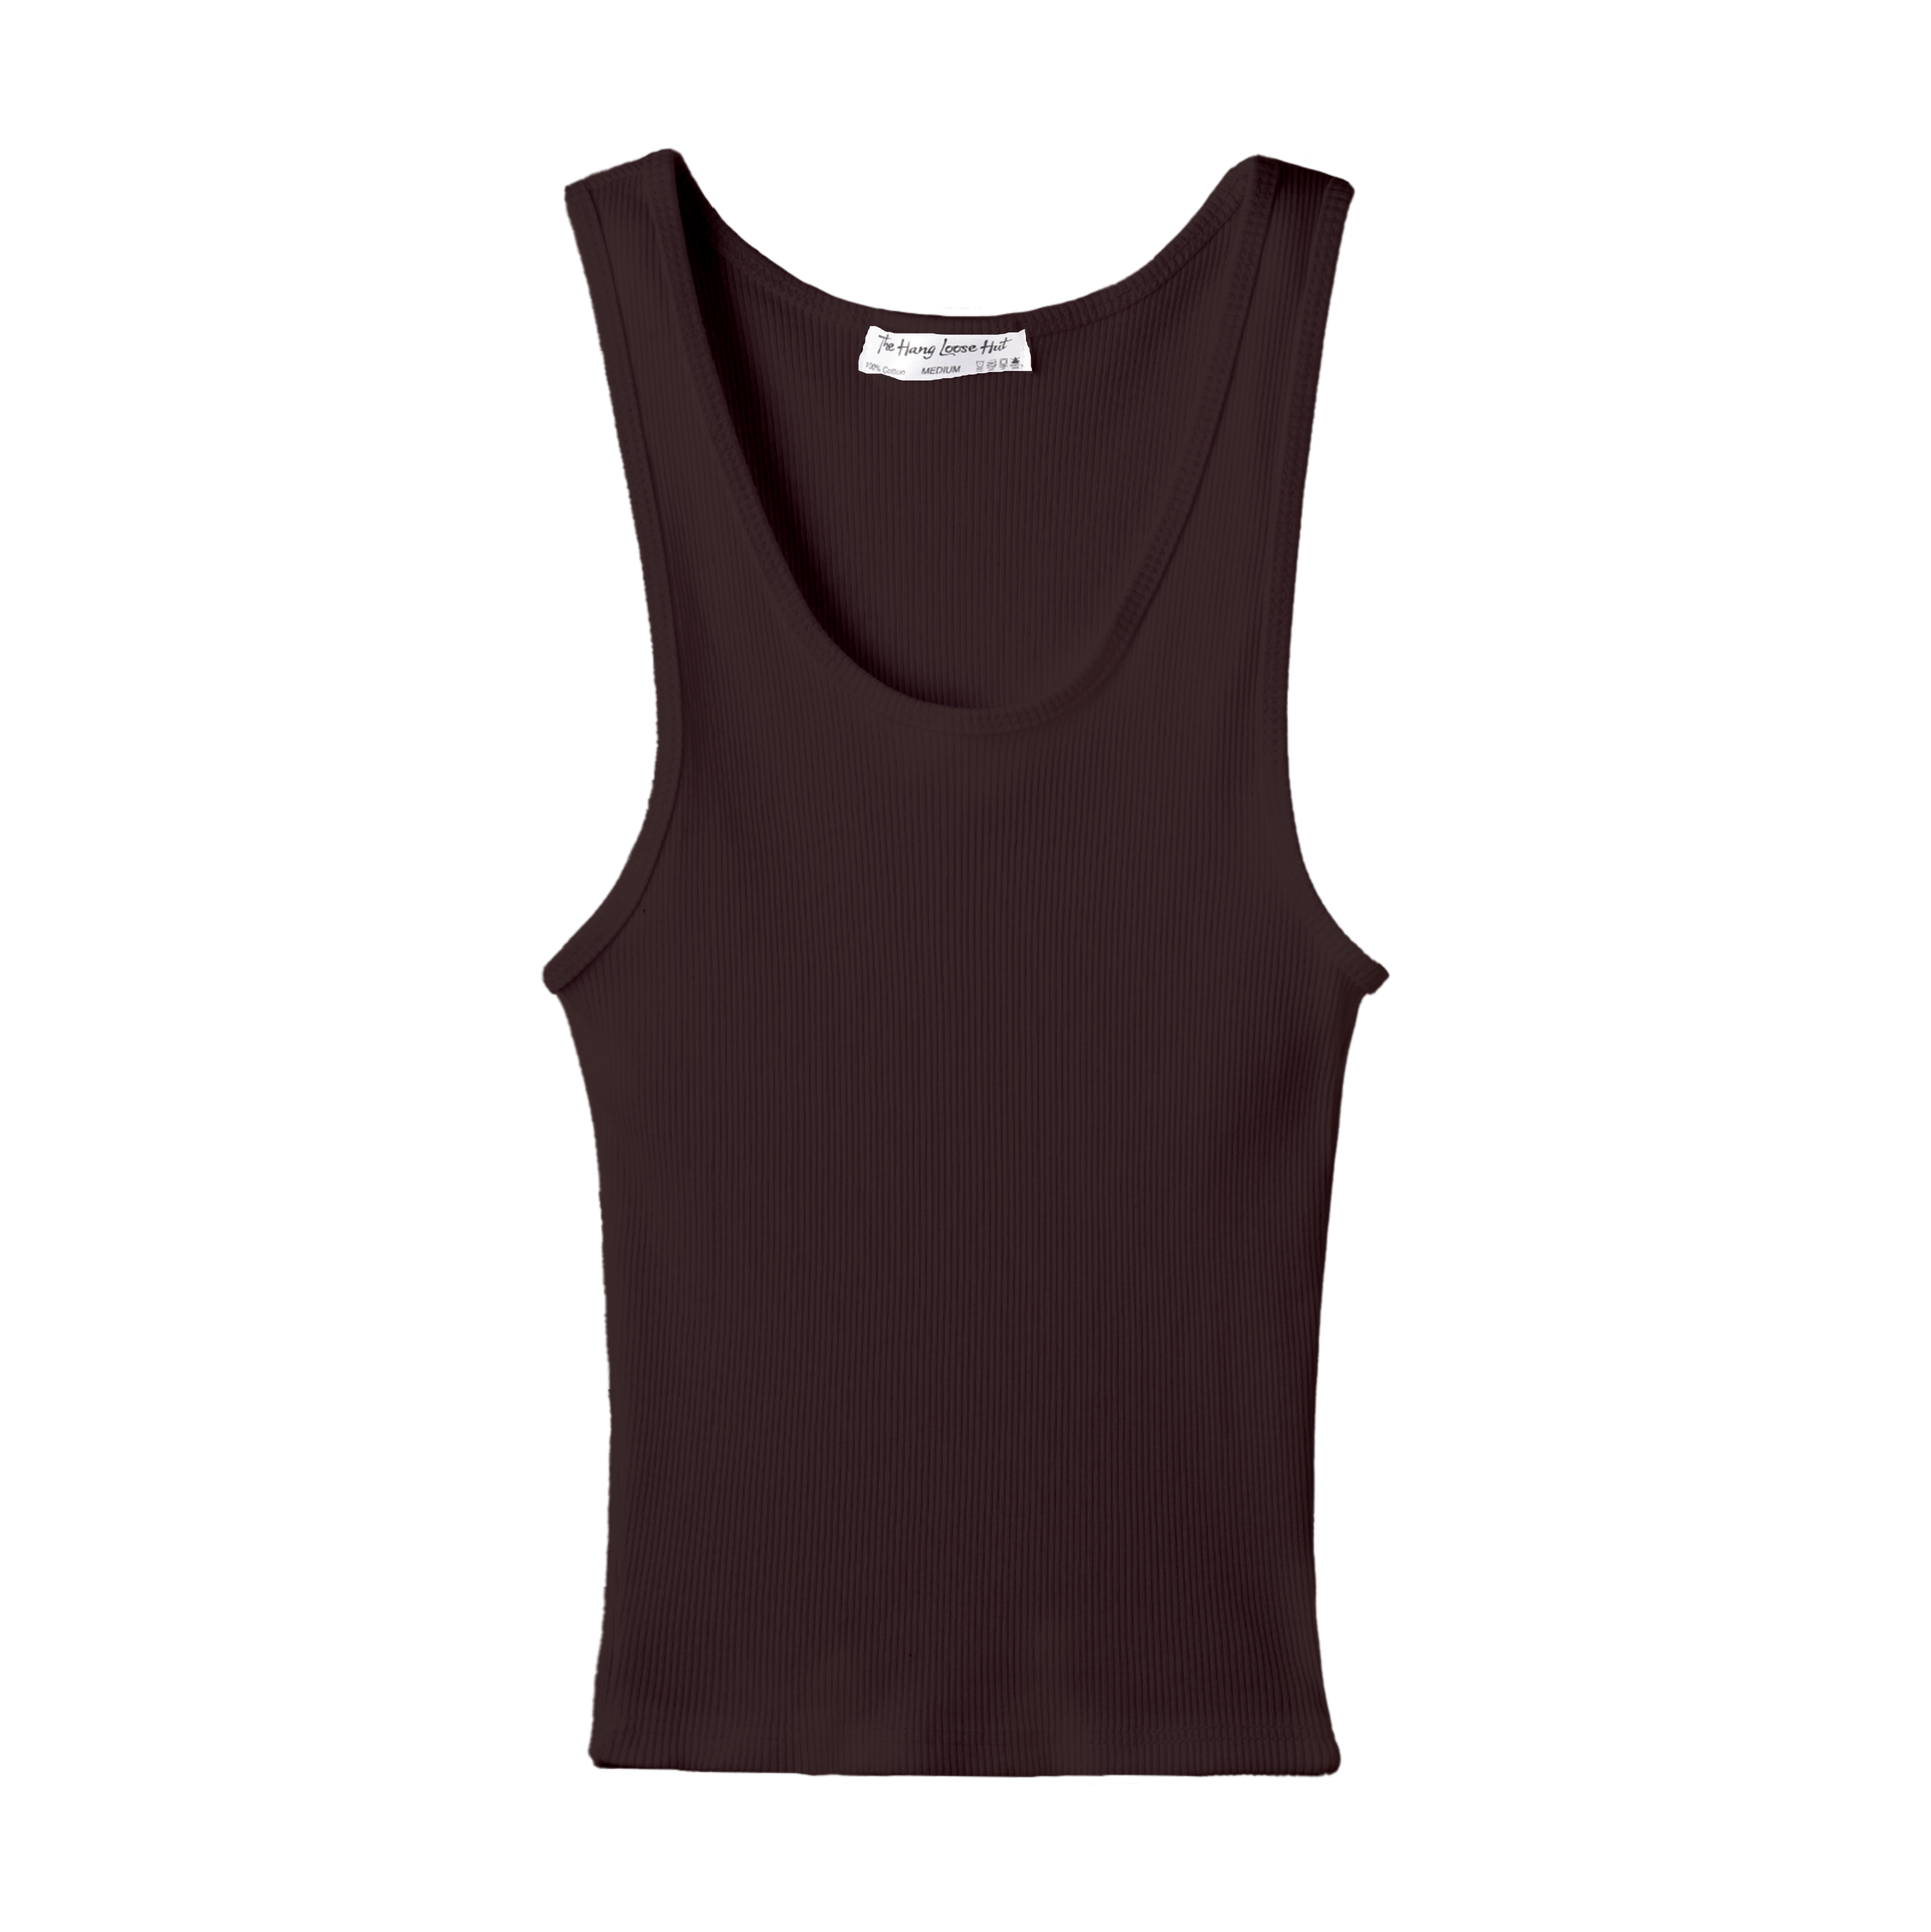 Full Sunset Tank (Low Neck Tank) Solid Color